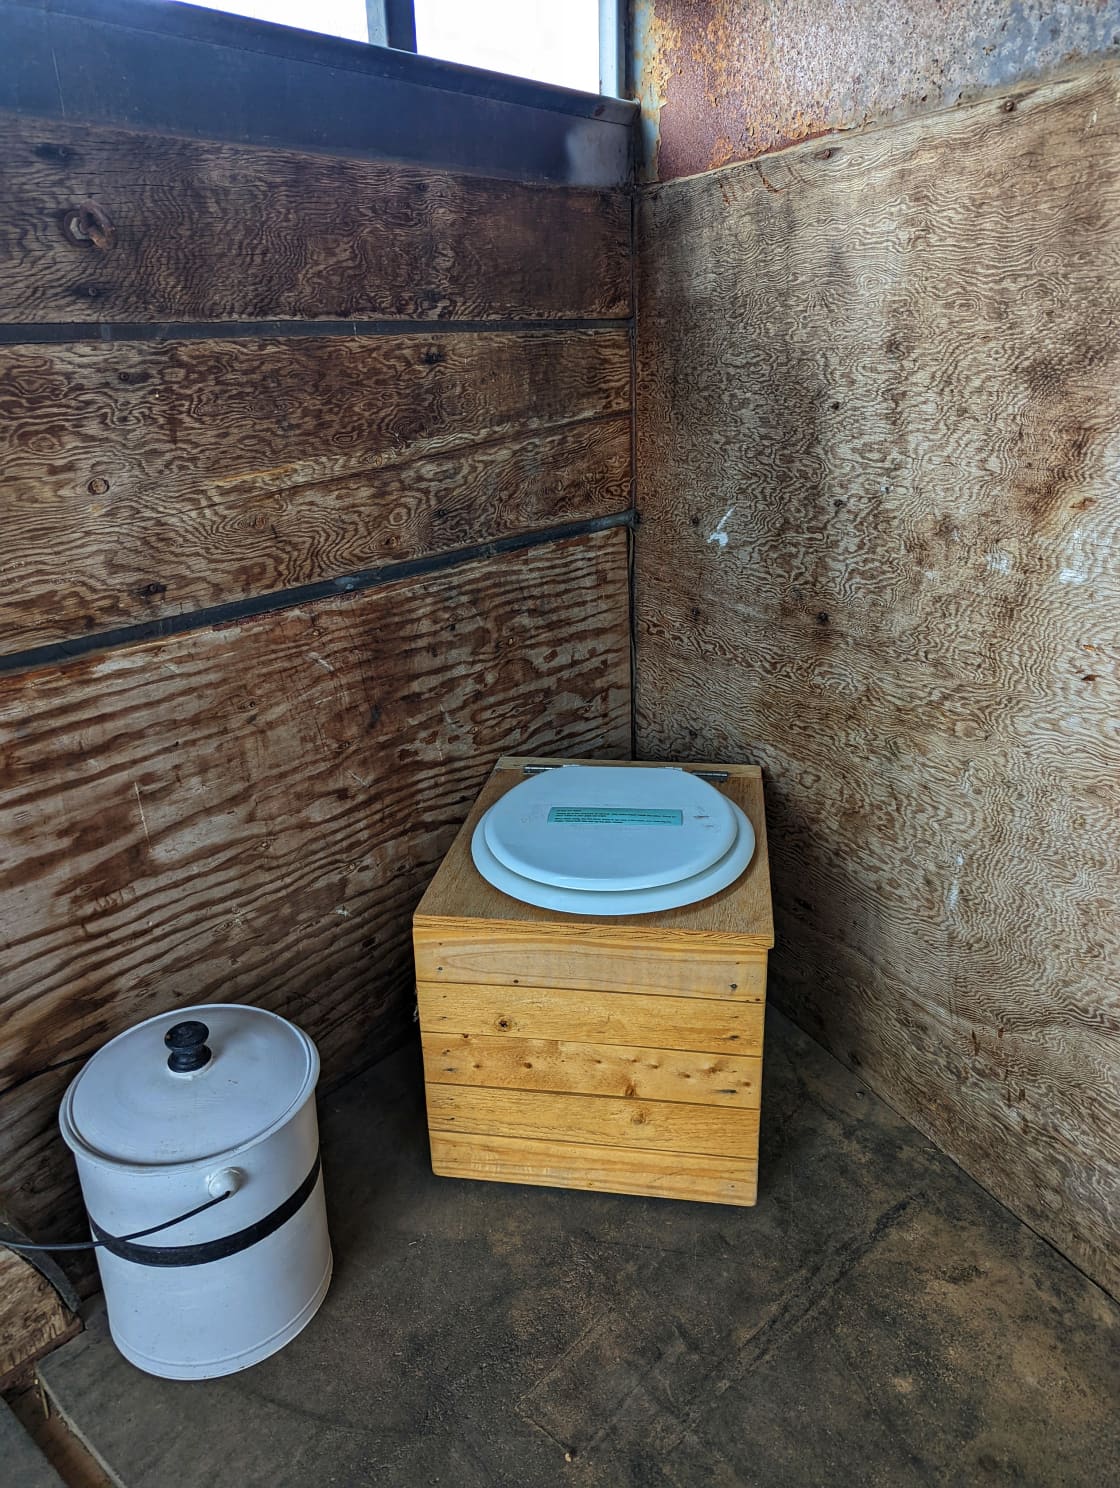 A composting toilet allows your stay to be as sustainable as possible!  Compost will be used to fertilize nonedible plants, in the future!  